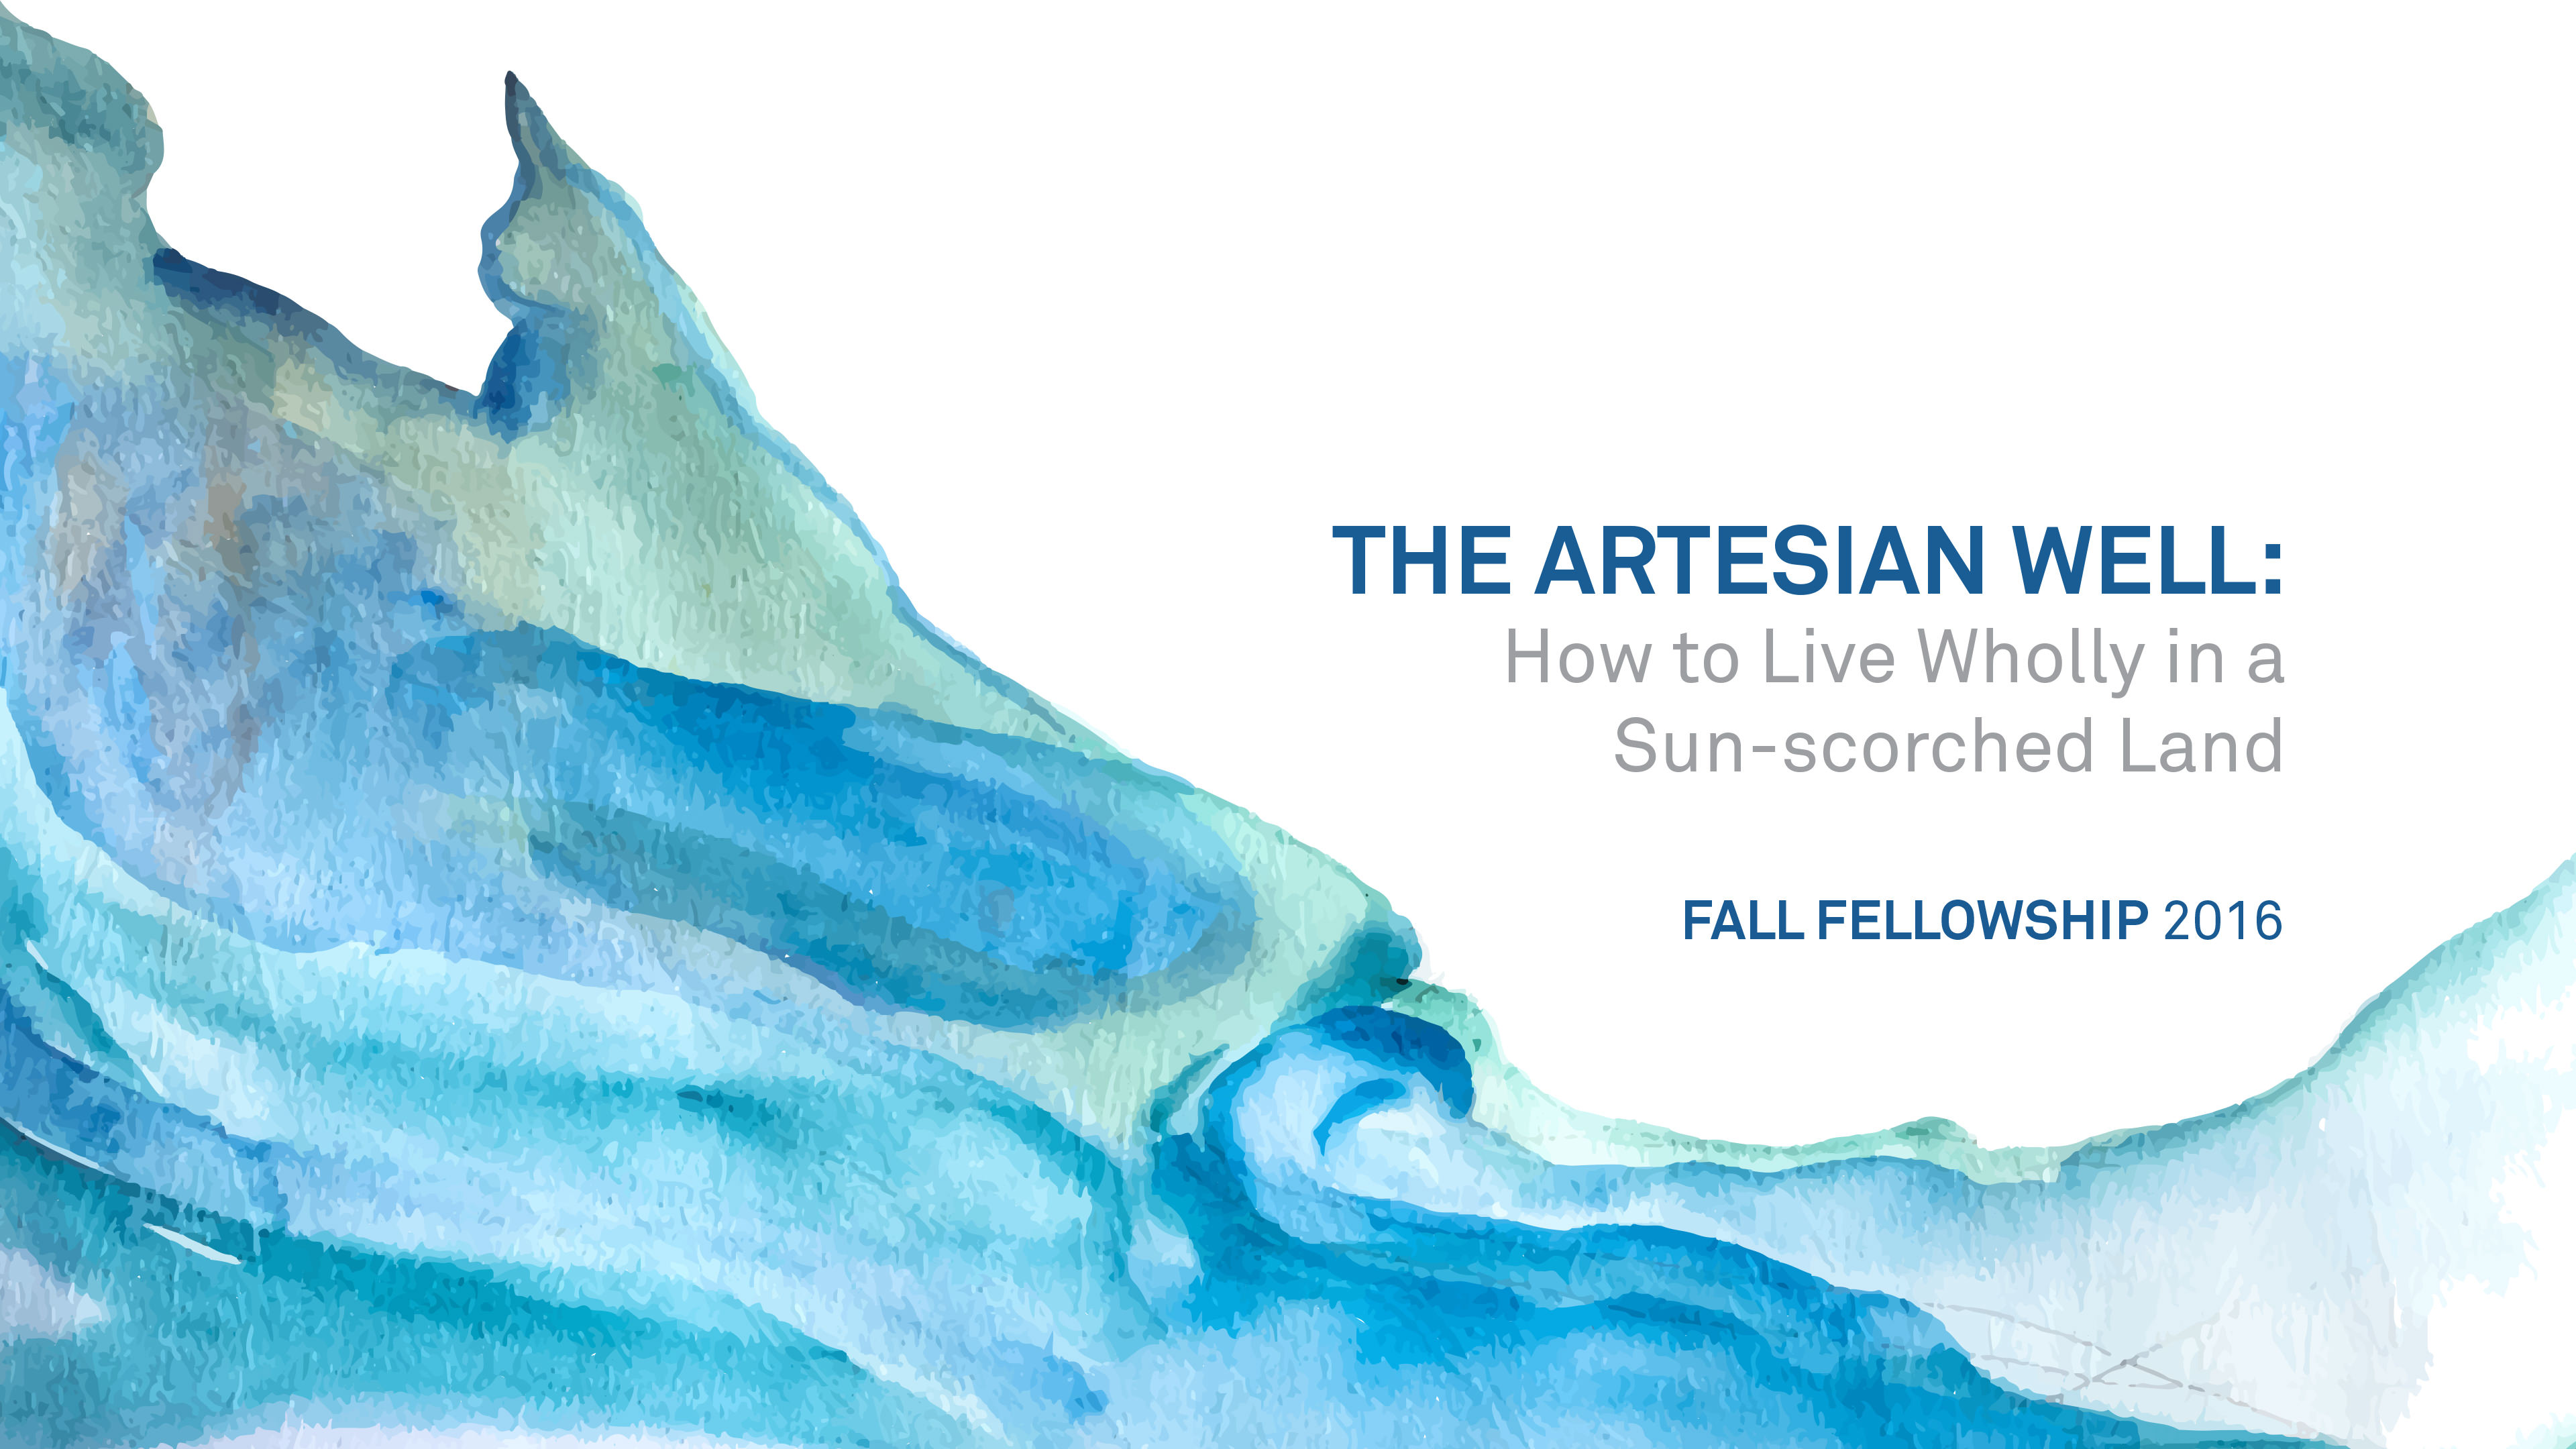 The Artesian Well: How to Live Wholly in a Sun-scorched Land